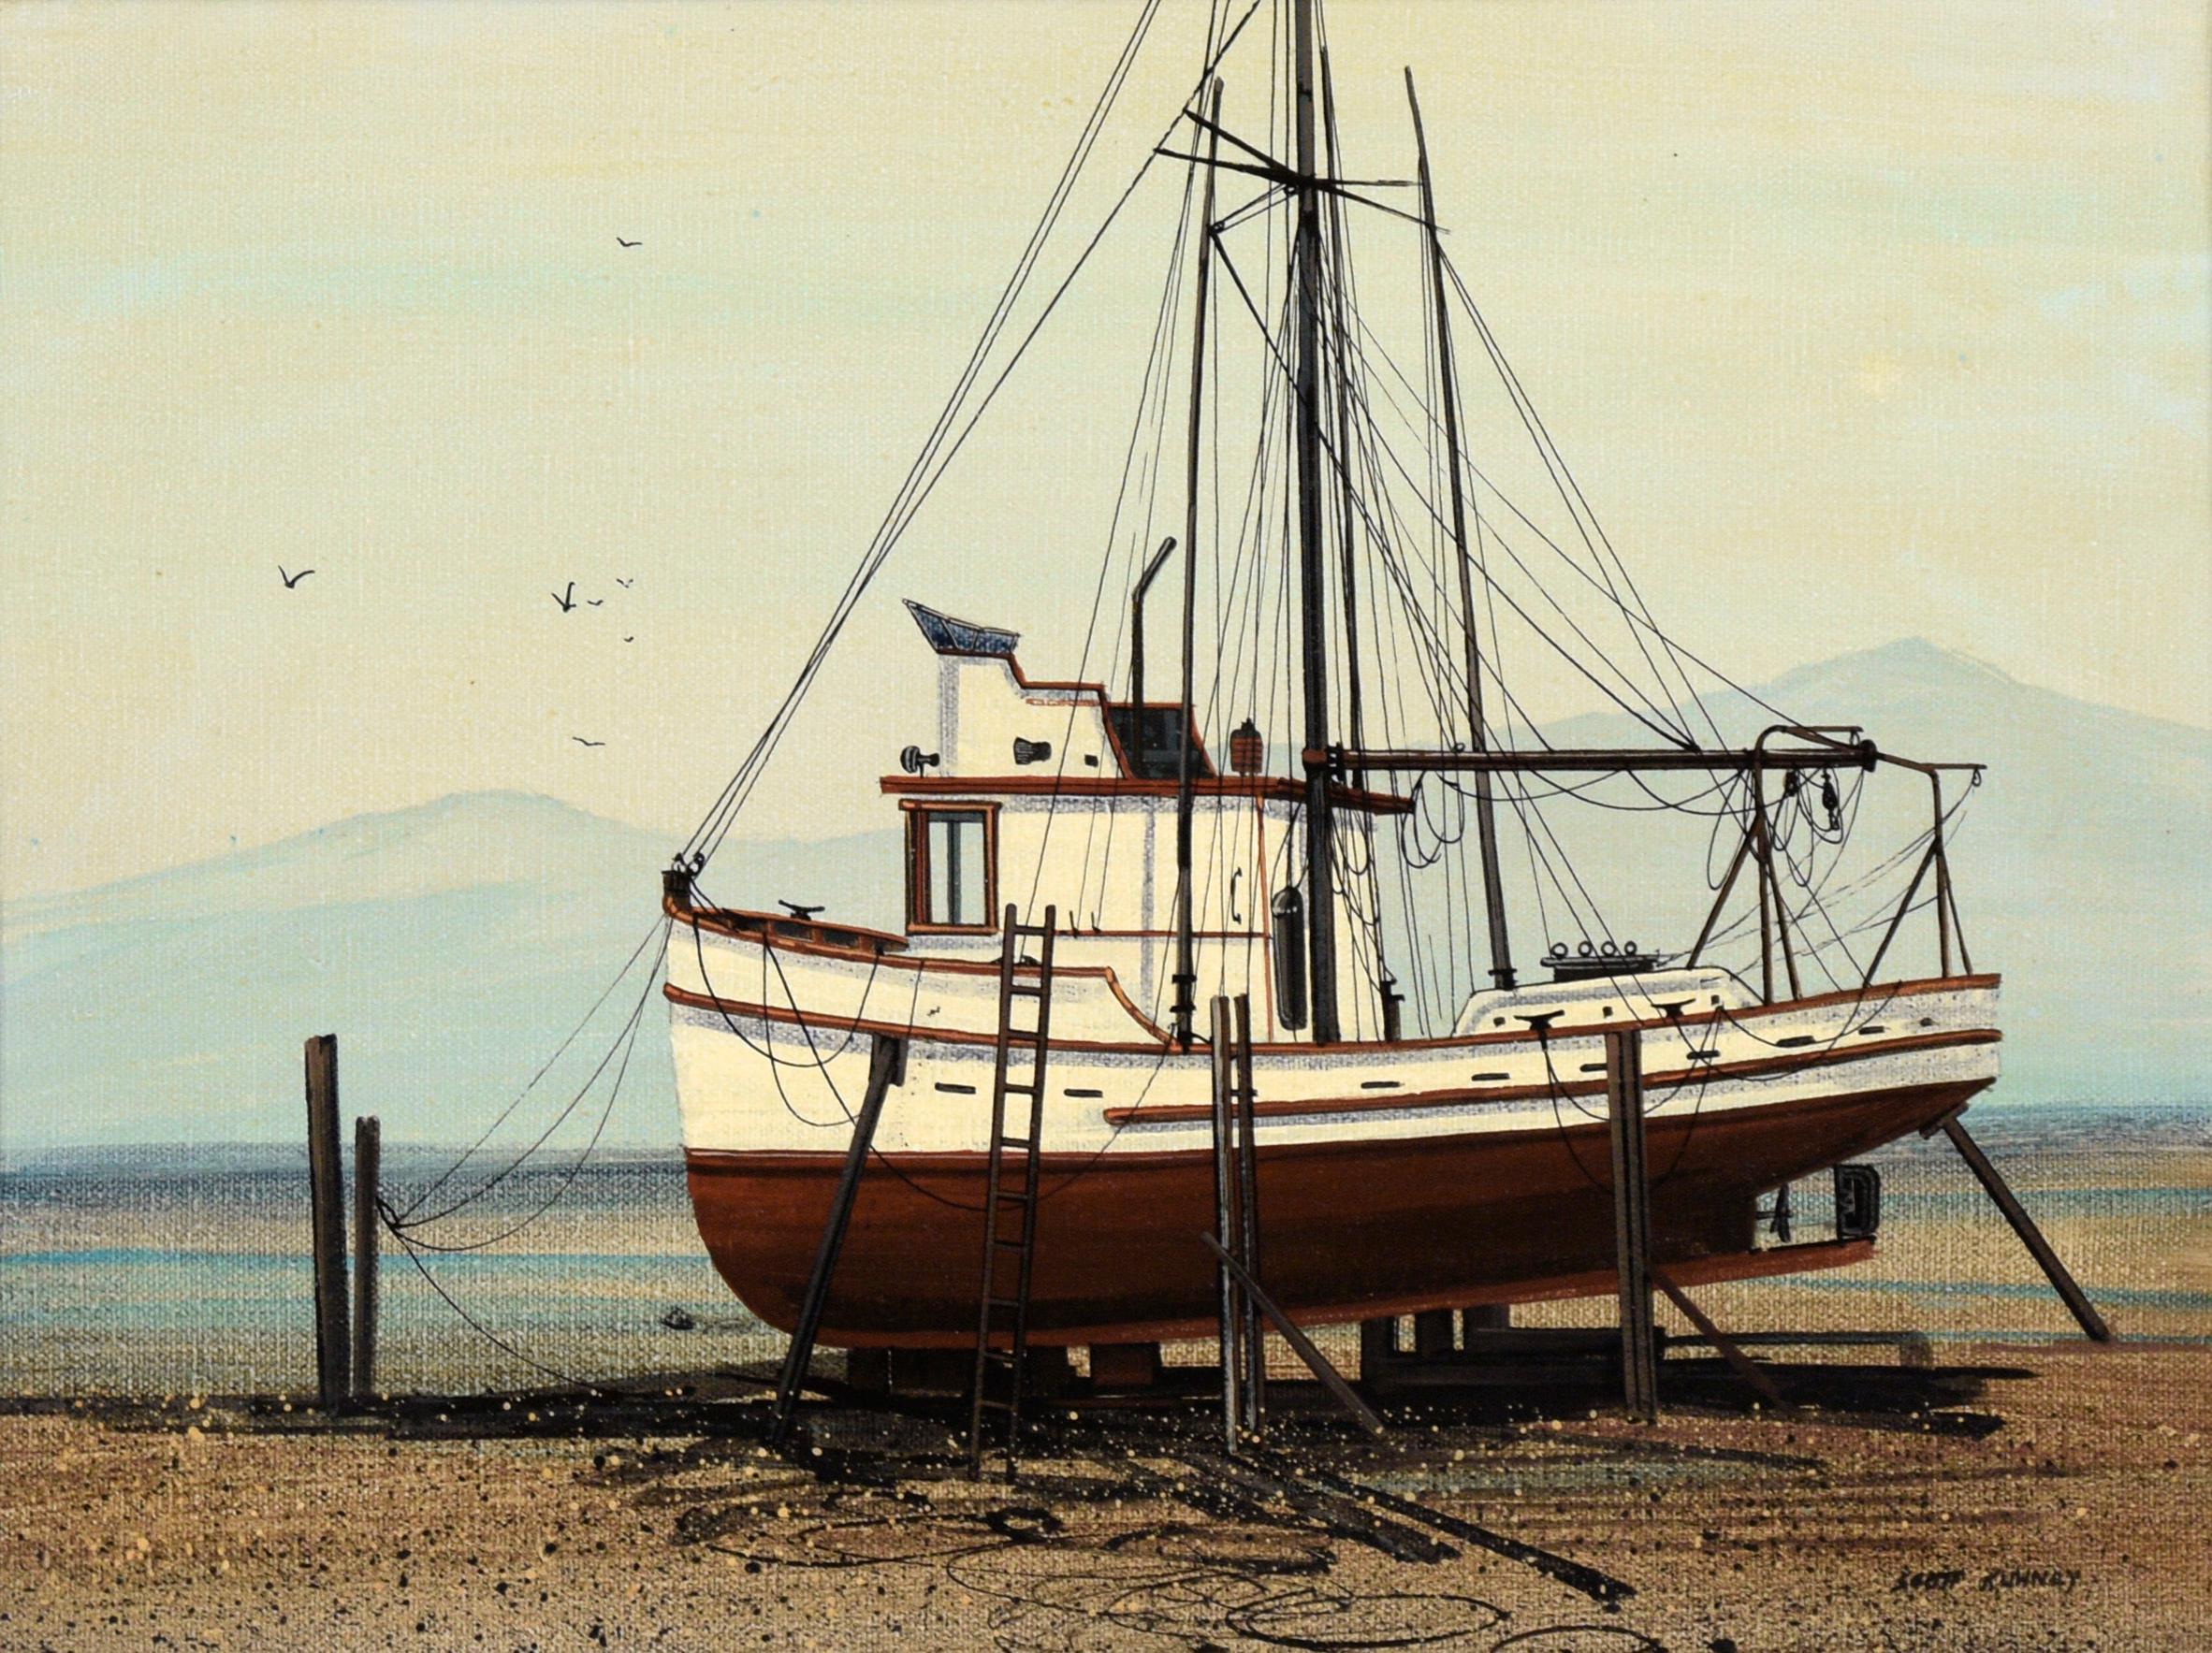 Fishing Boat in Dry Dock at the Shore - Oil on Canvas - Painting by Glenn Scott Kuhnly